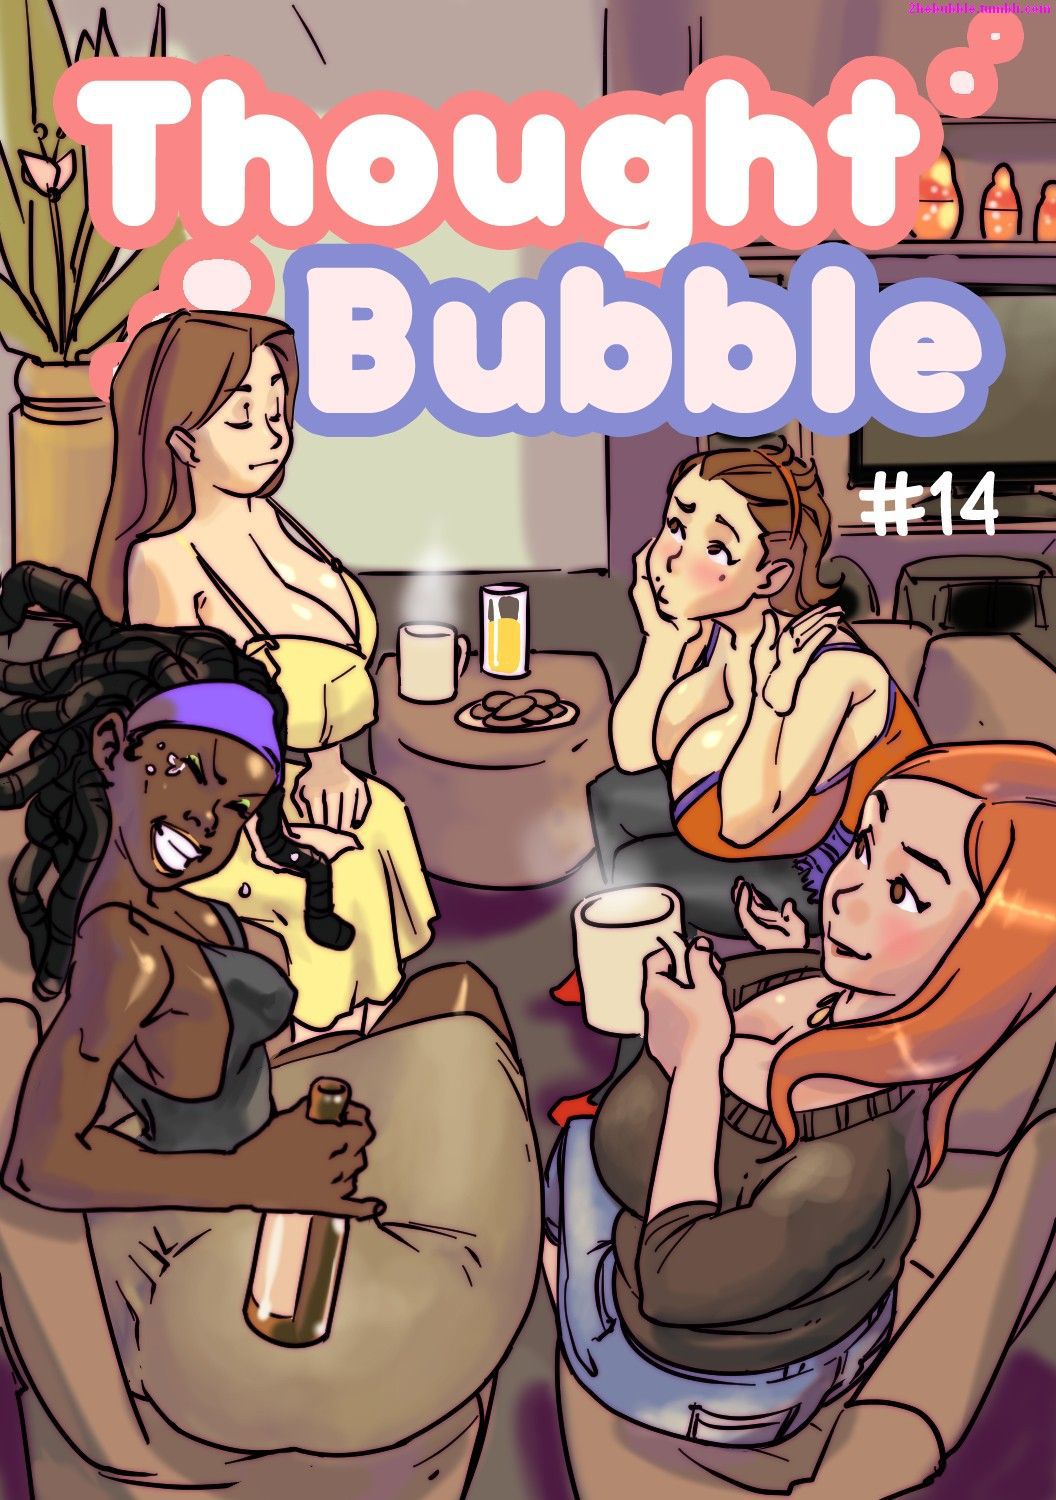 [Sidneymt] Thought Bubble #14-15-16 [Ongoing] 1